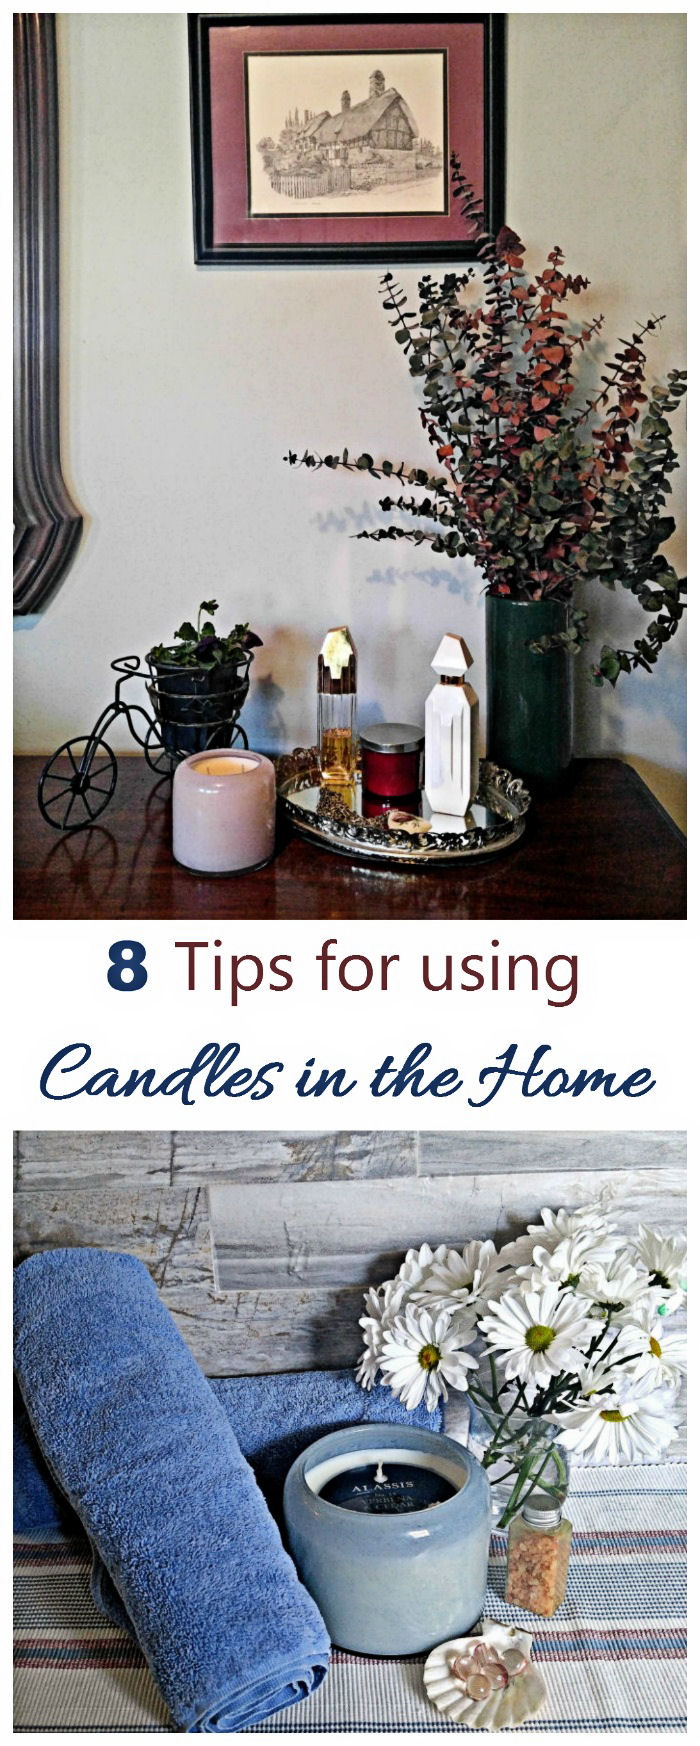 Candles add mood and coziness to any rooms of the house. I use them everywhere, including on my patio. See my 8 tips for using candles and how to make the most of them in every room of the house.. #chesapeakebaycandle #alassis #ad